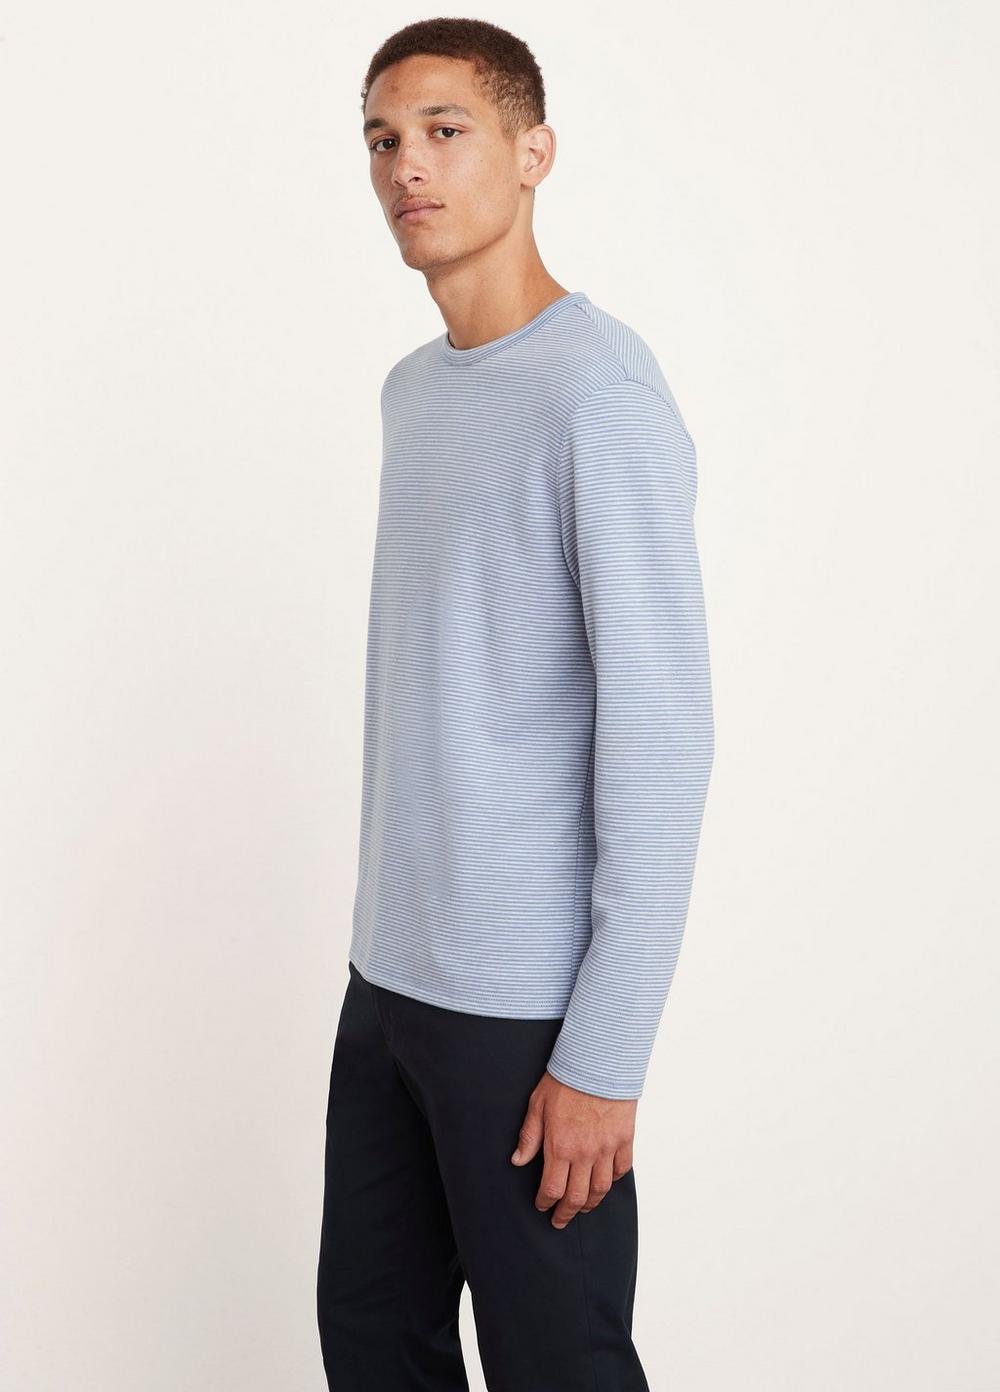 Double Face Striped Long Sleeve T-Shirt in Vince Sold Out Products 